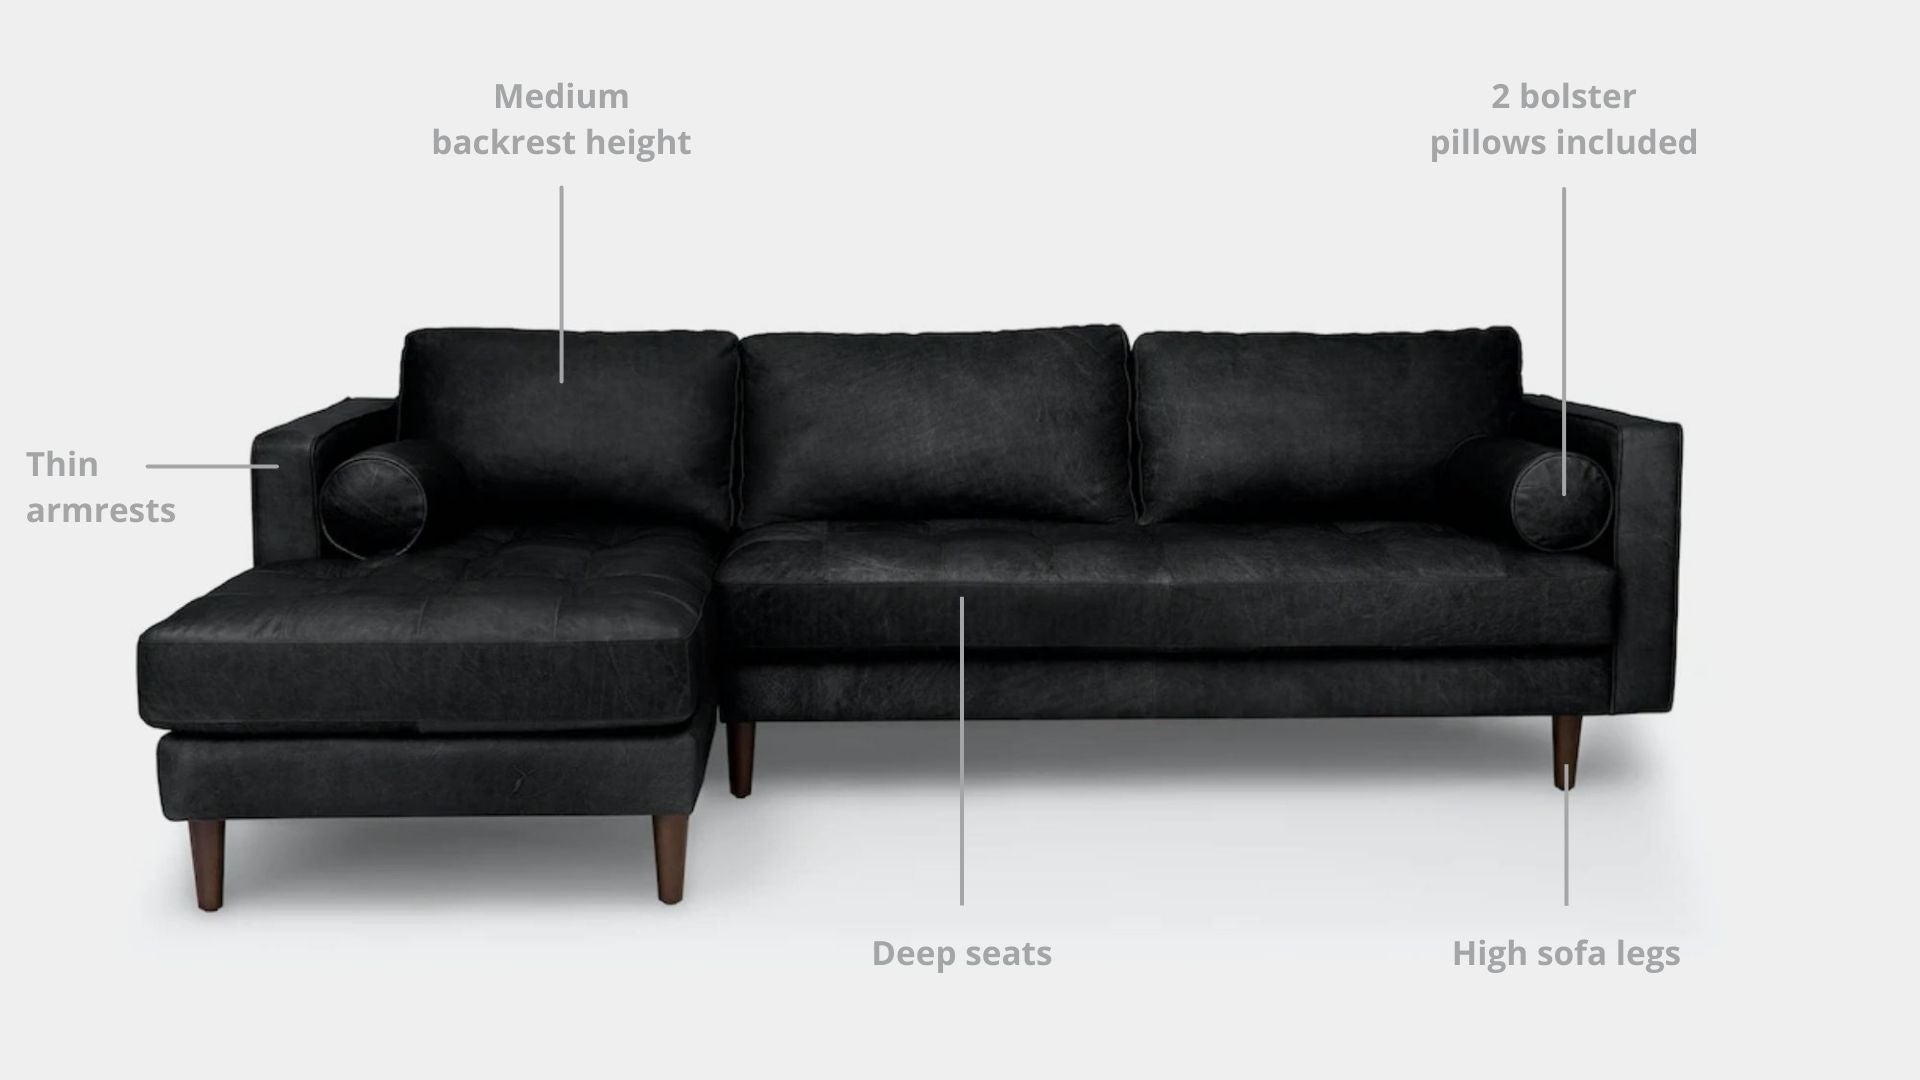 Key features such as armrest thickness, cushion height, seat depth and sofa leg height for Castle Full Leather Sectional Sofa